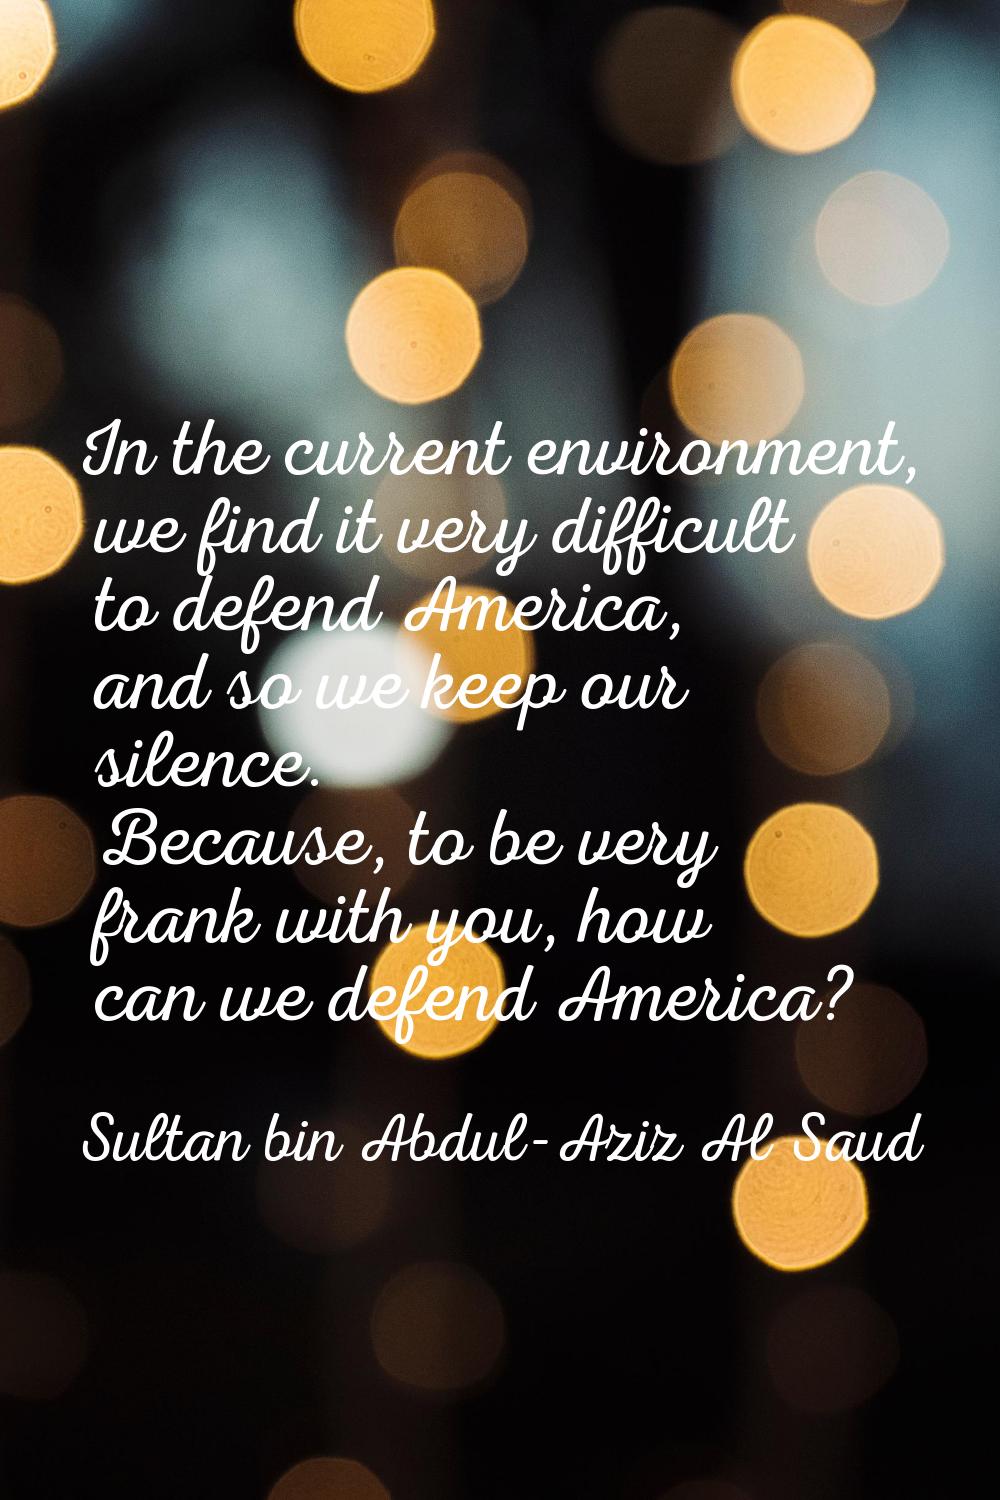 In the current environment, we find it very difficult to defend America, and so we keep our silence